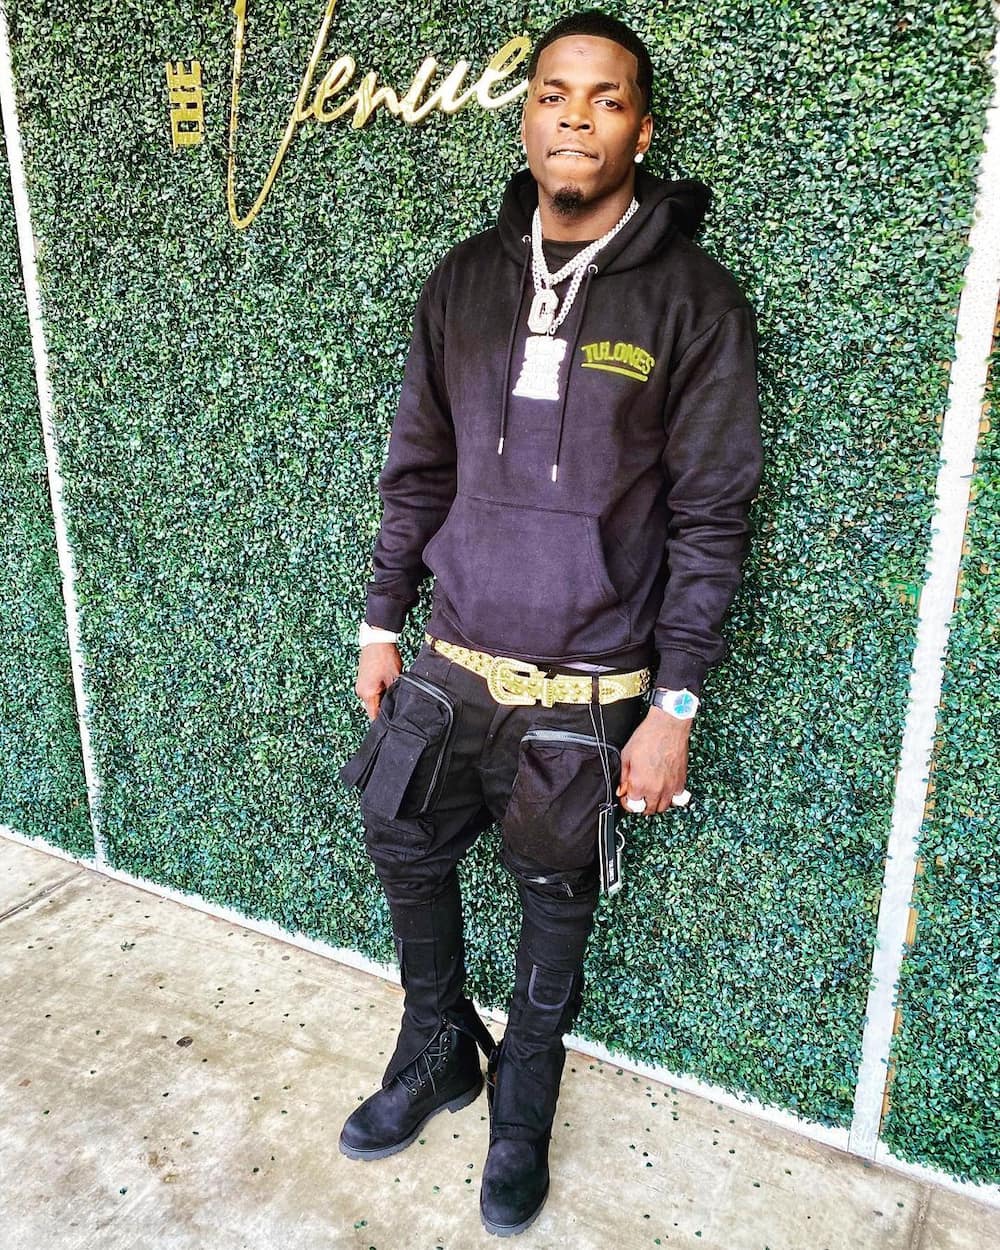 Memphis Rappers Got The Best Drip In The Industry 💧💯Name A City